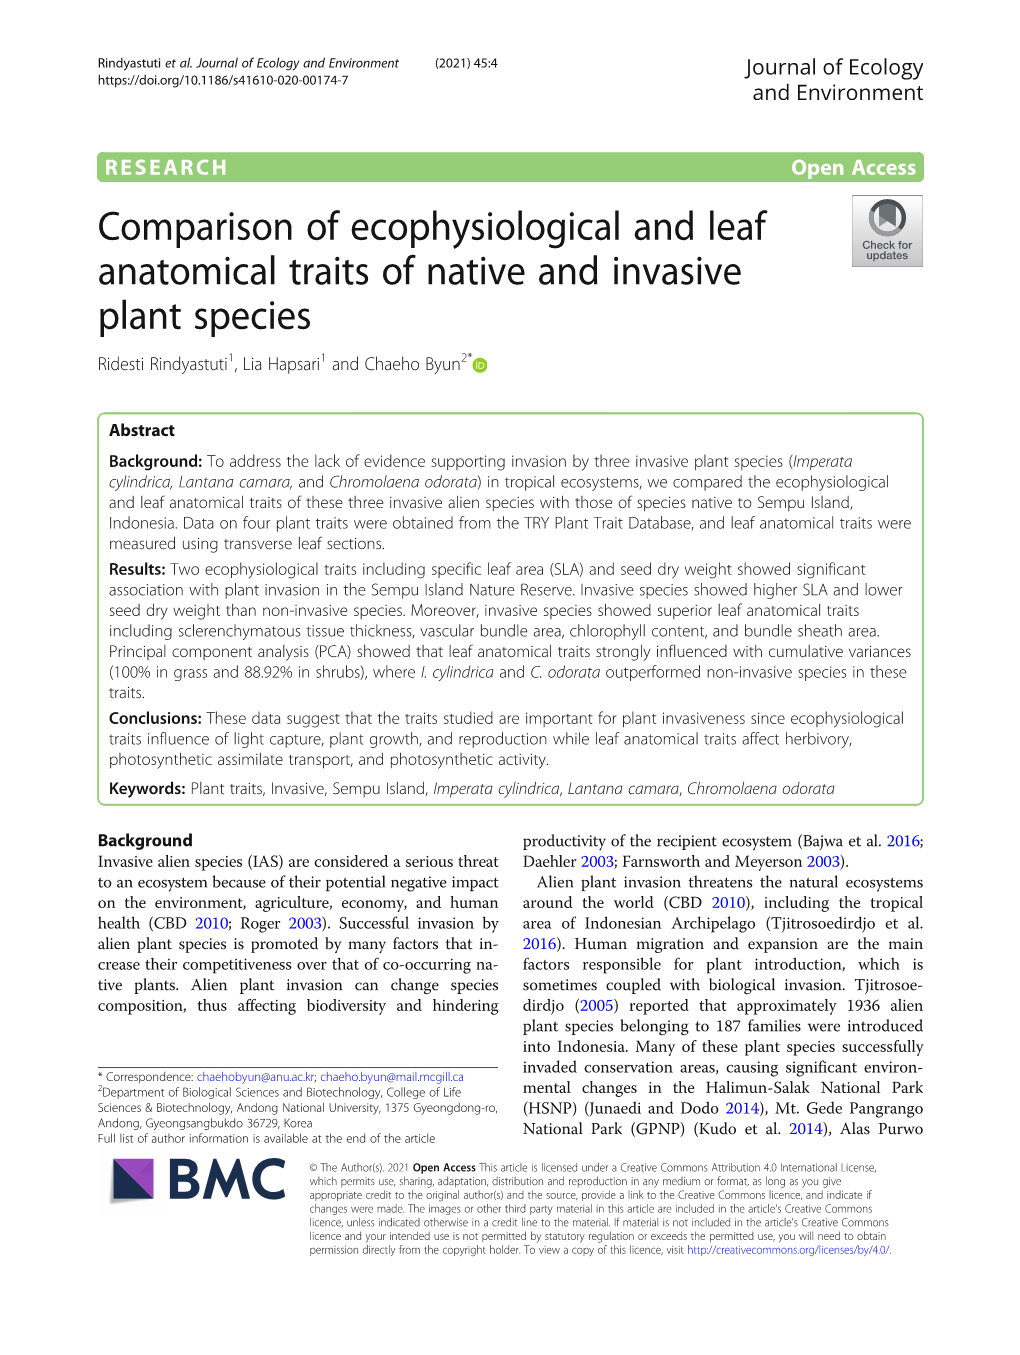 Comparison of Ecophysiological and Leaf Anatomical Traits of Native and Invasive Plant Species Ridesti Rindyastuti1, Lia Hapsari1 and Chaeho Byun2*